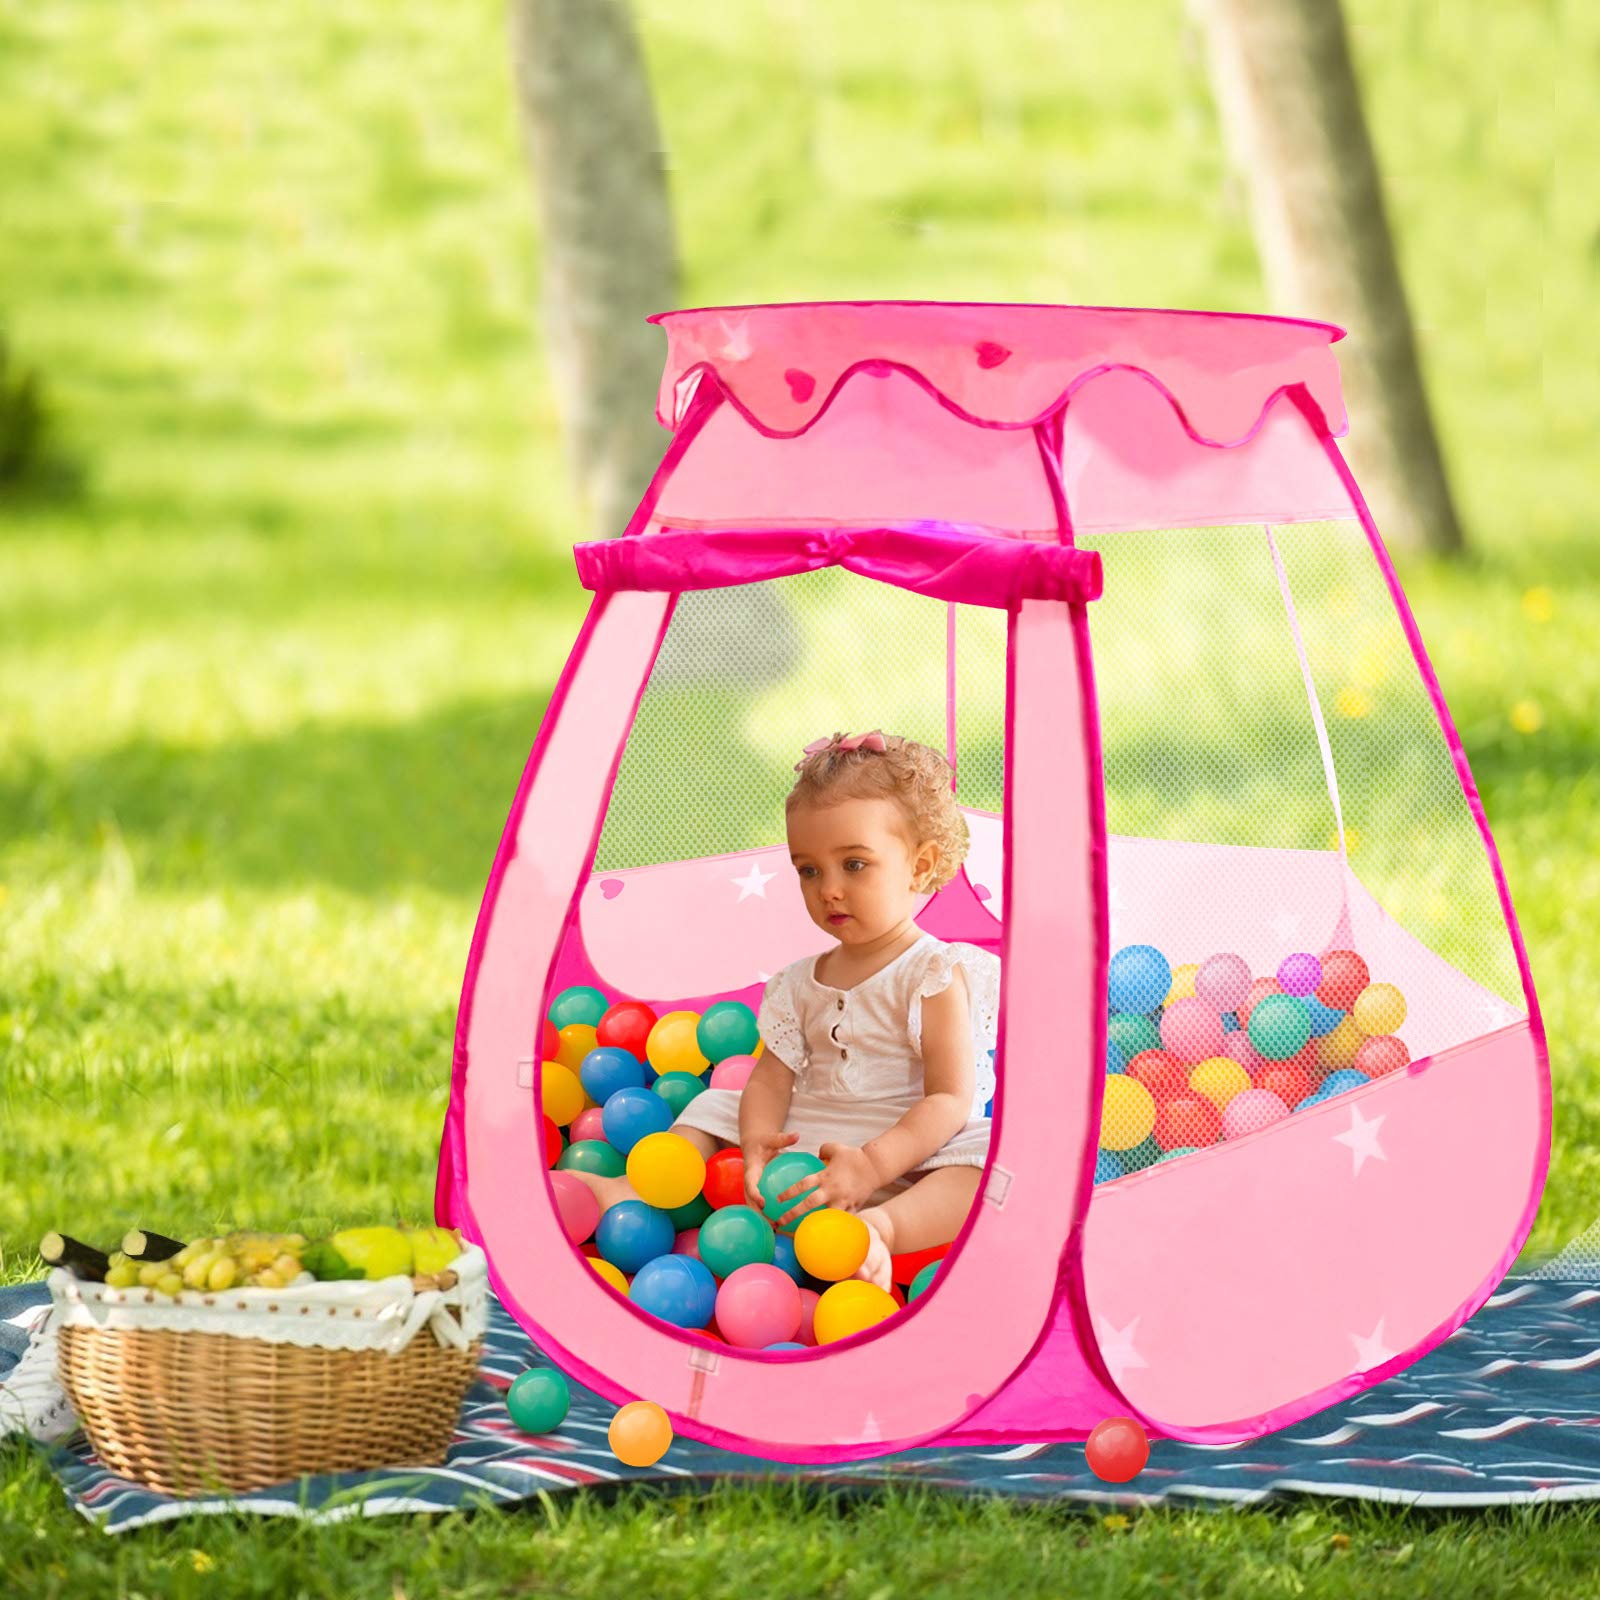 Tikolus Pop Up Princess Tent with Colorful Star Lights, Toys for 1 2 3 Year Old Girls Birthday Gift, Foldable Ball Pit with Carrying Bag, Indoor Outdoor Play Tent for Kids (Balls Not Included)